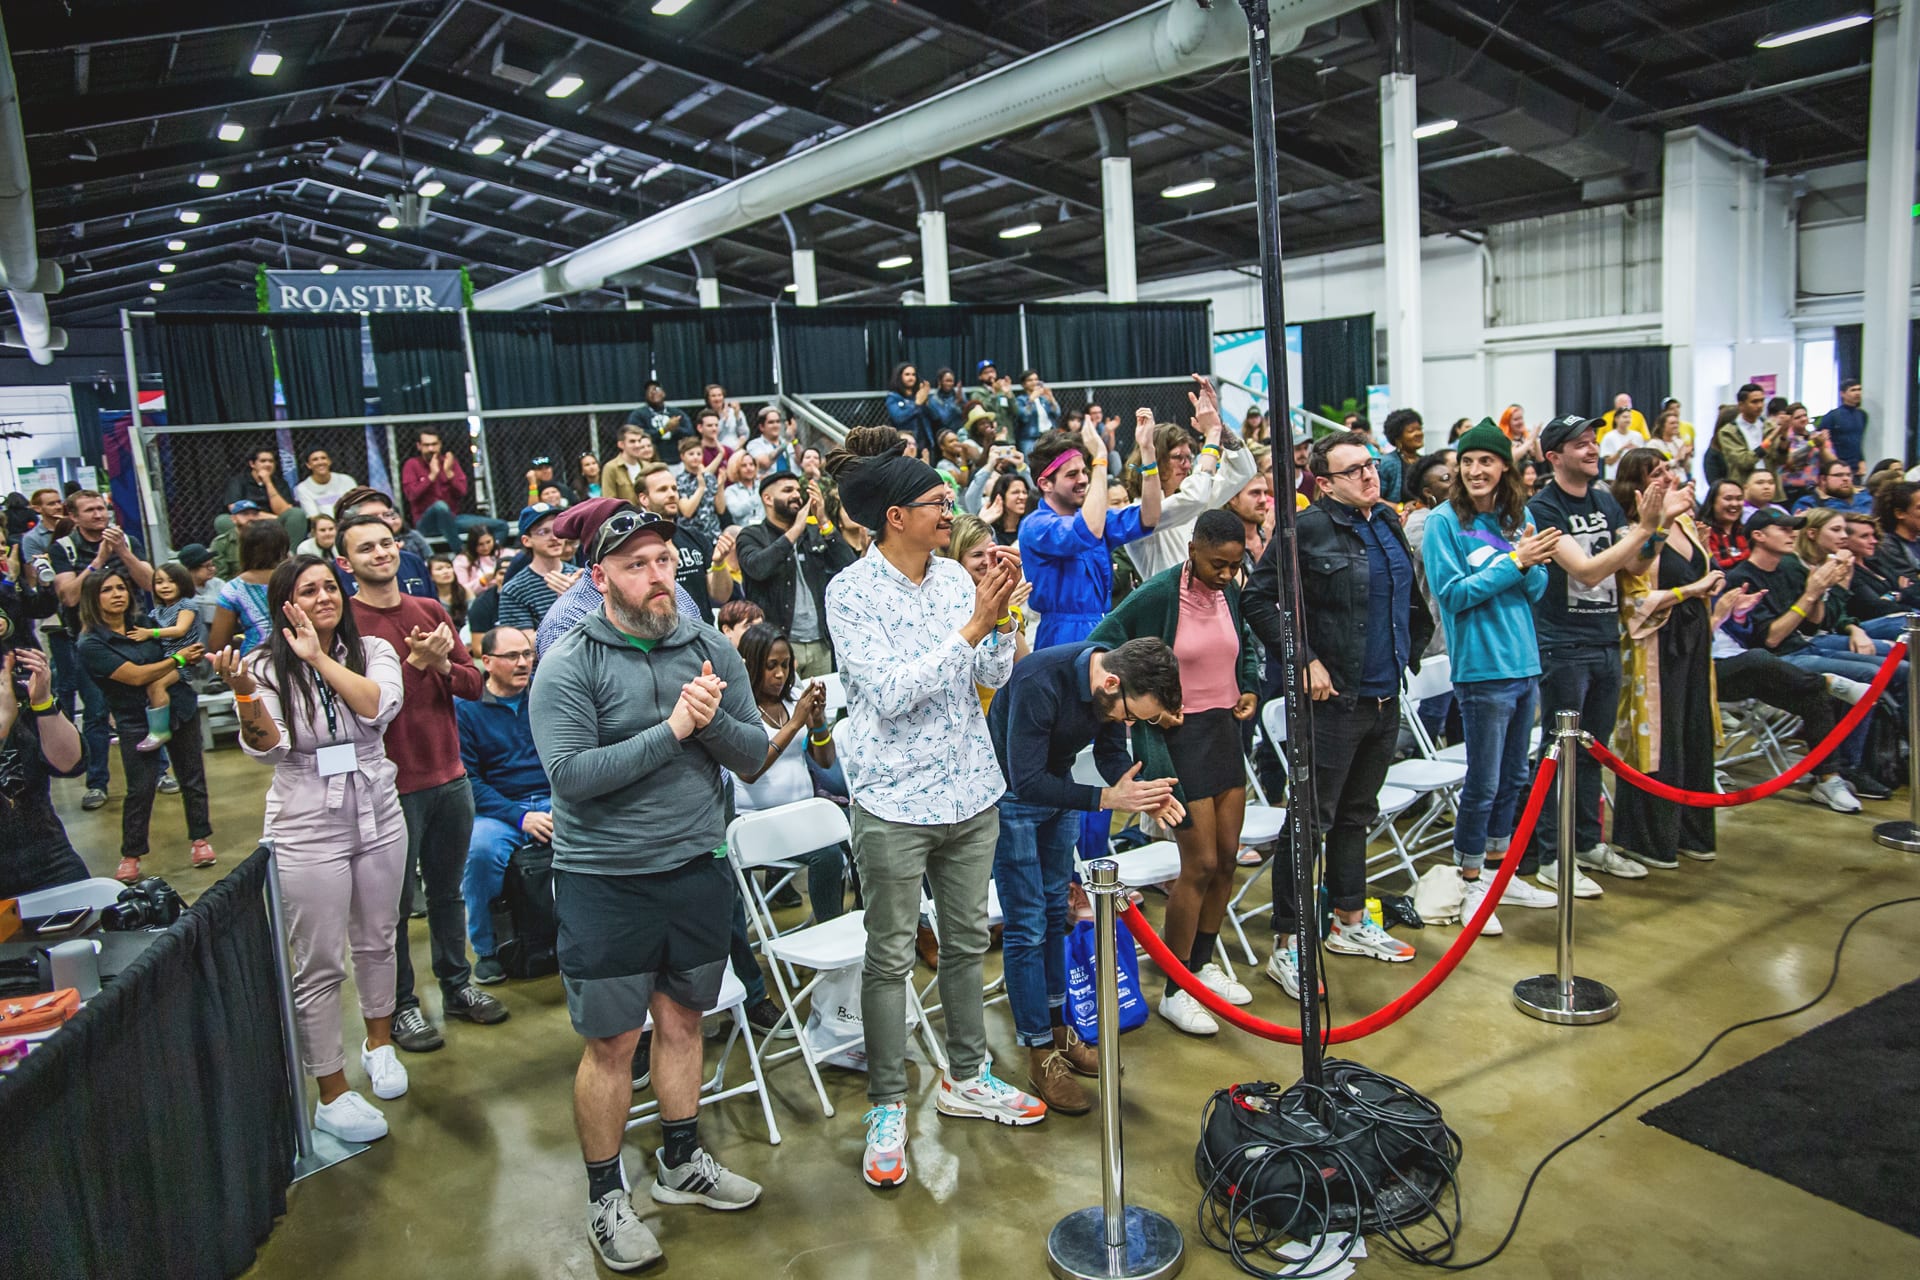 Here Are The Winners From The 2020 US Coffee Champs Orange County Event